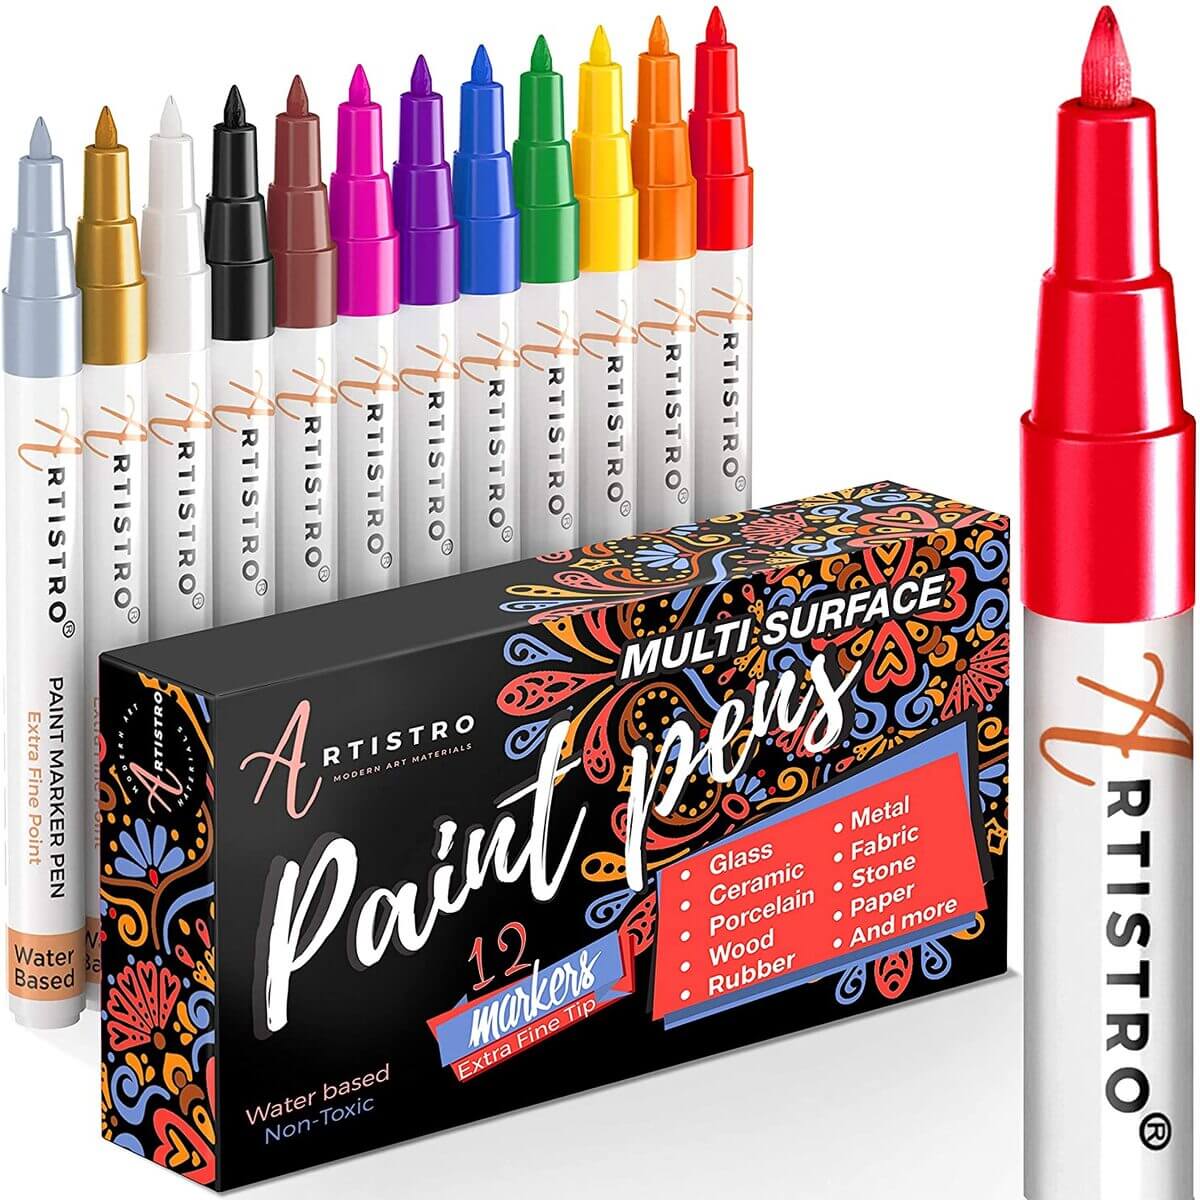 Paint markers guide: how to use paint pens and where to buy them - Gathered